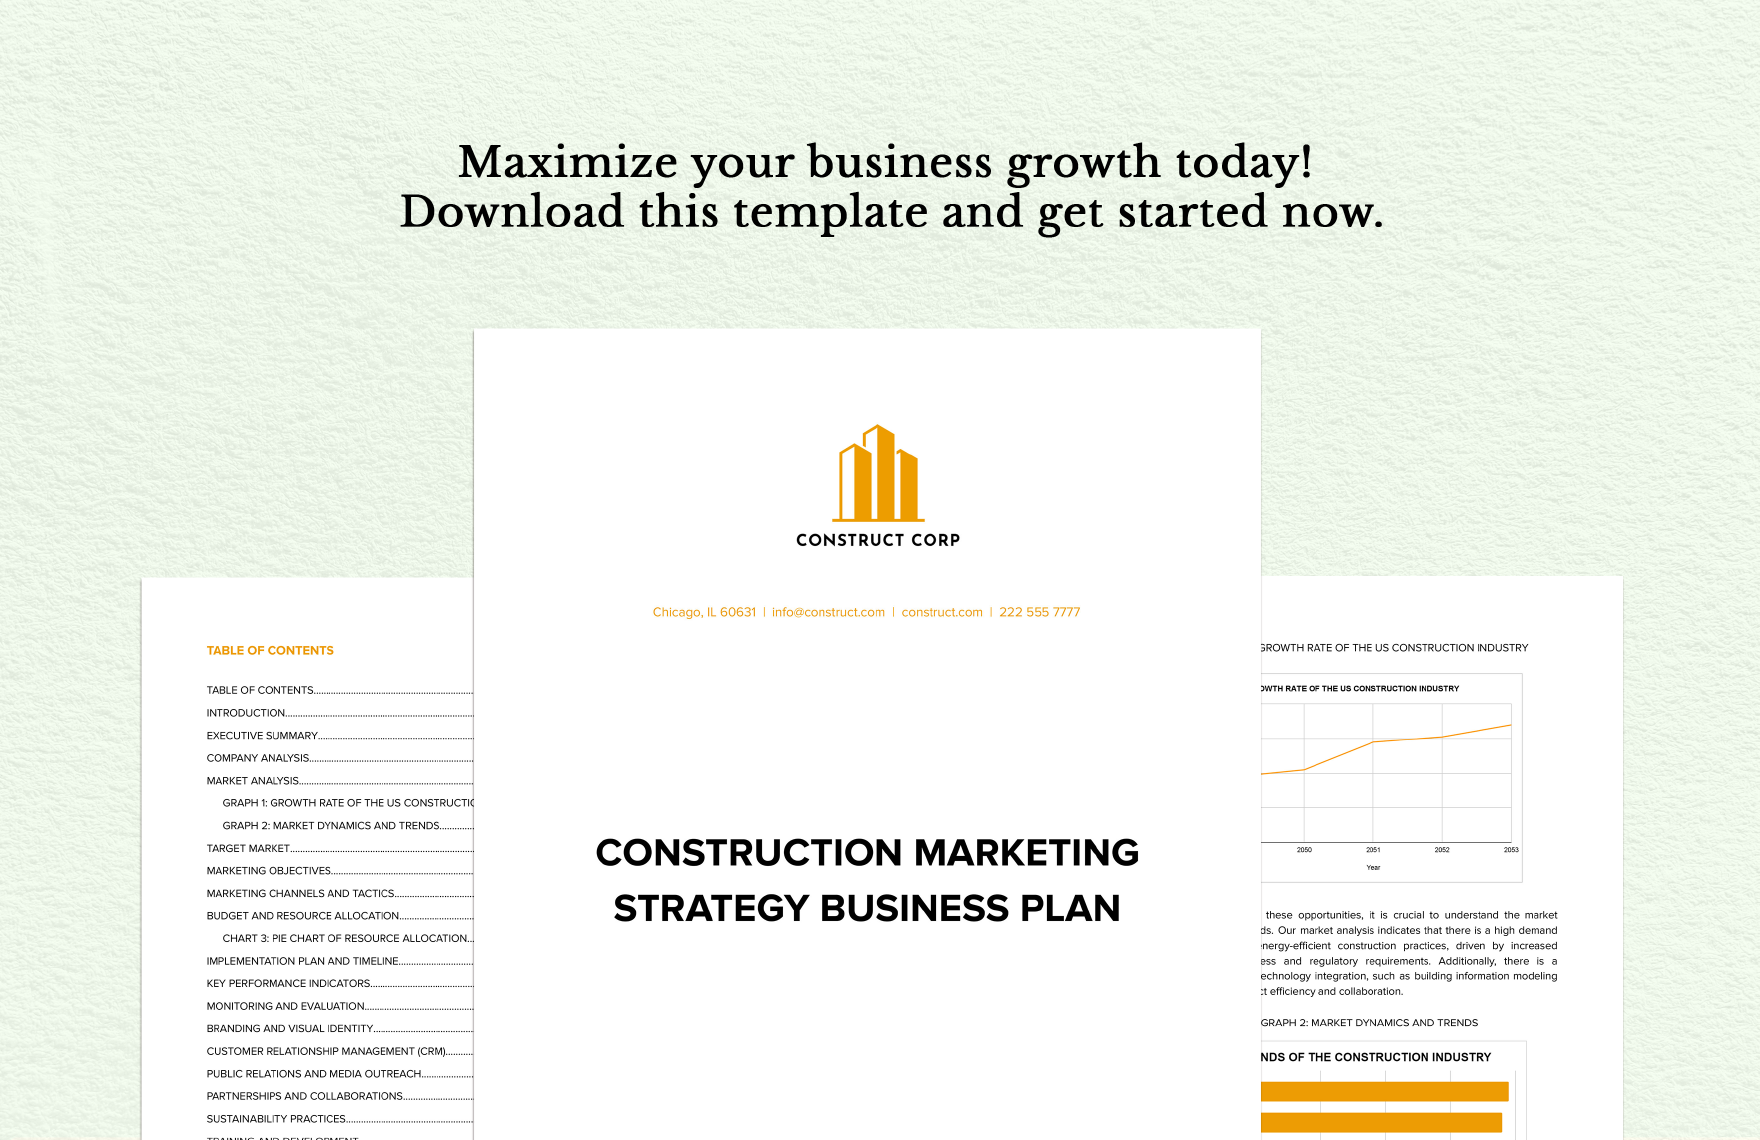 construction business plan marketing strategy